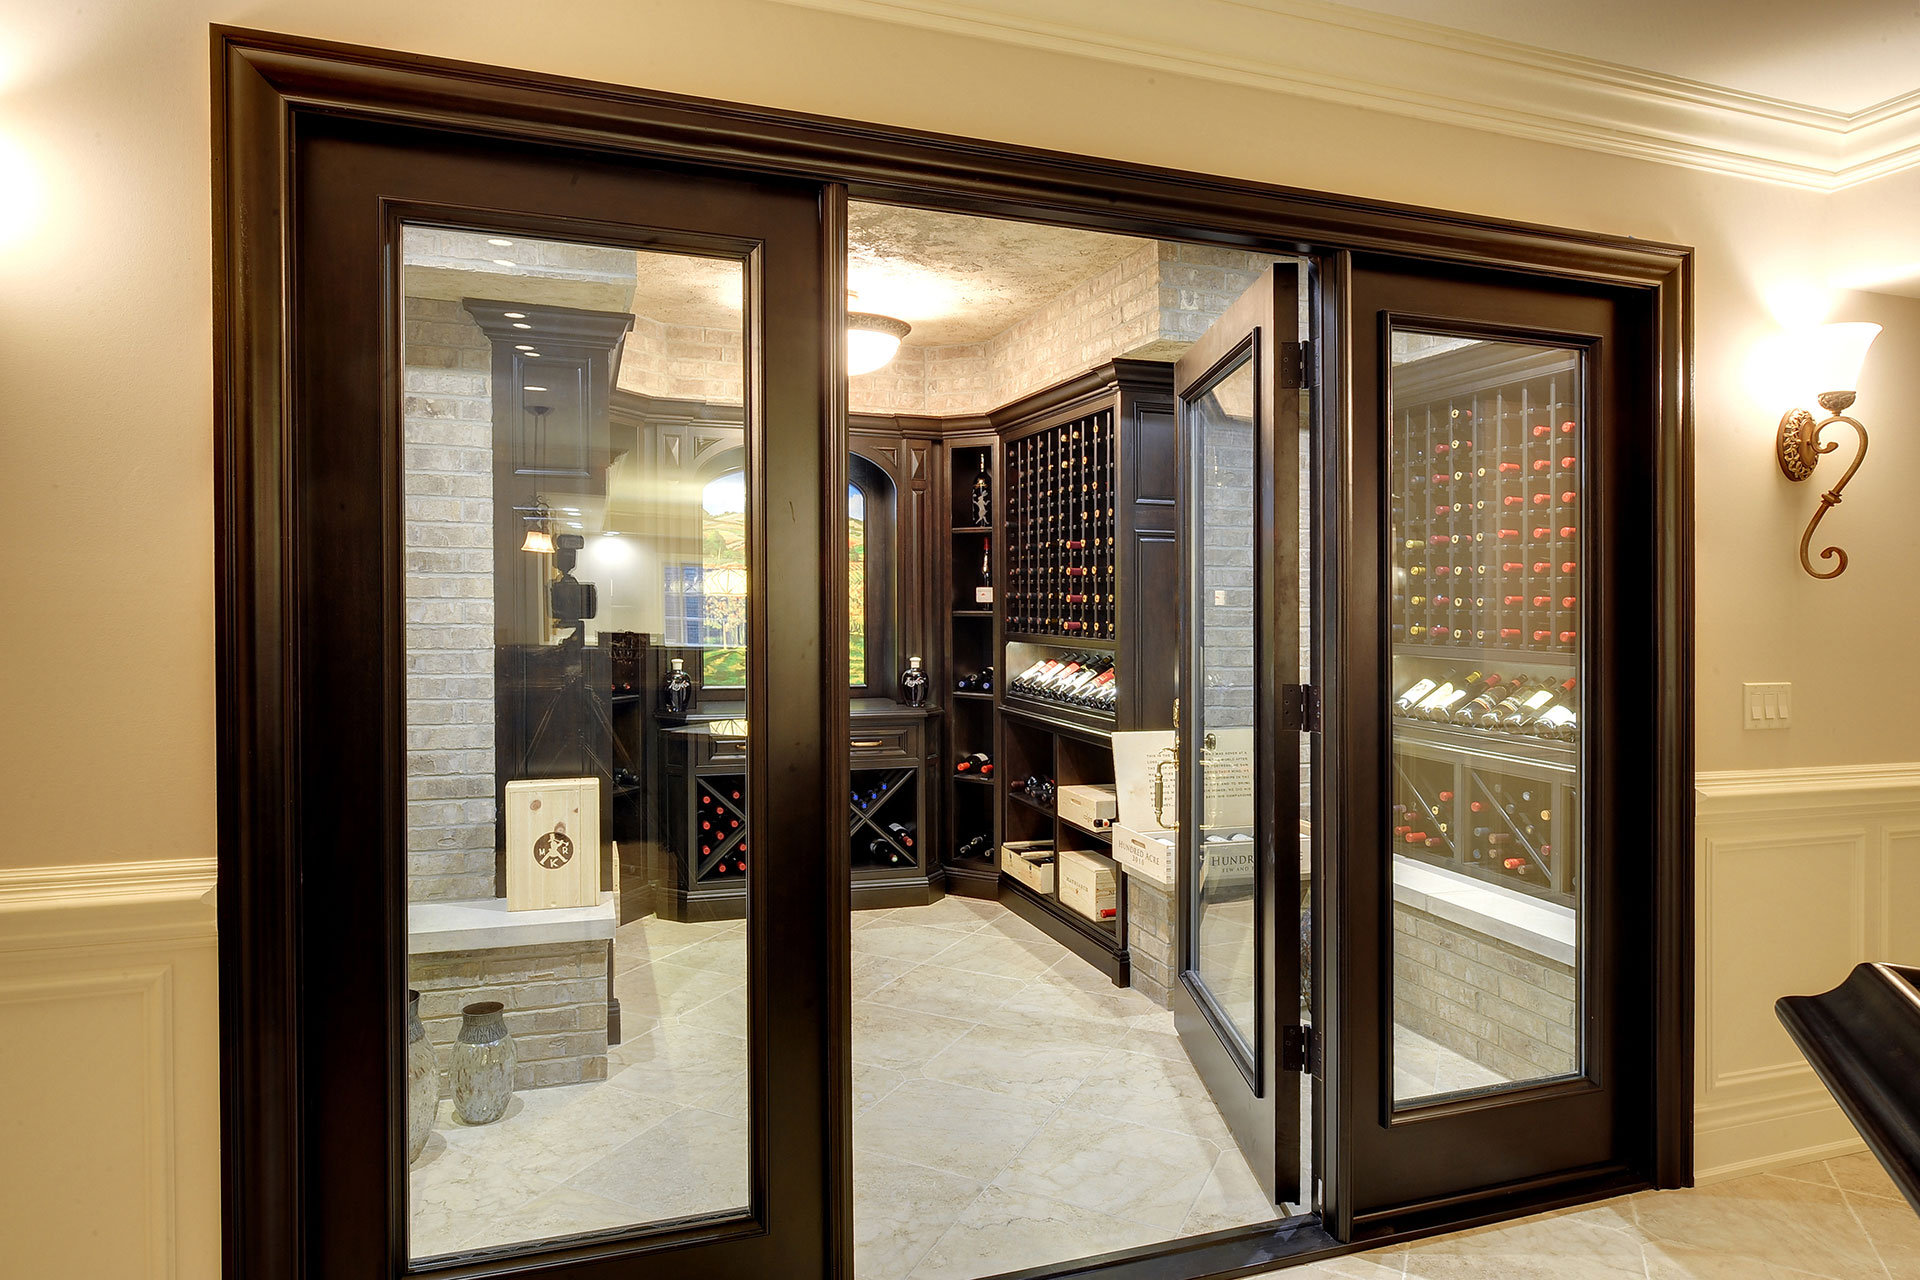 See through, custom made glass panel wine cellar entry system.  - Glenview Haus - Custom Doors, Wine Cellars and Cabinets in Chicago